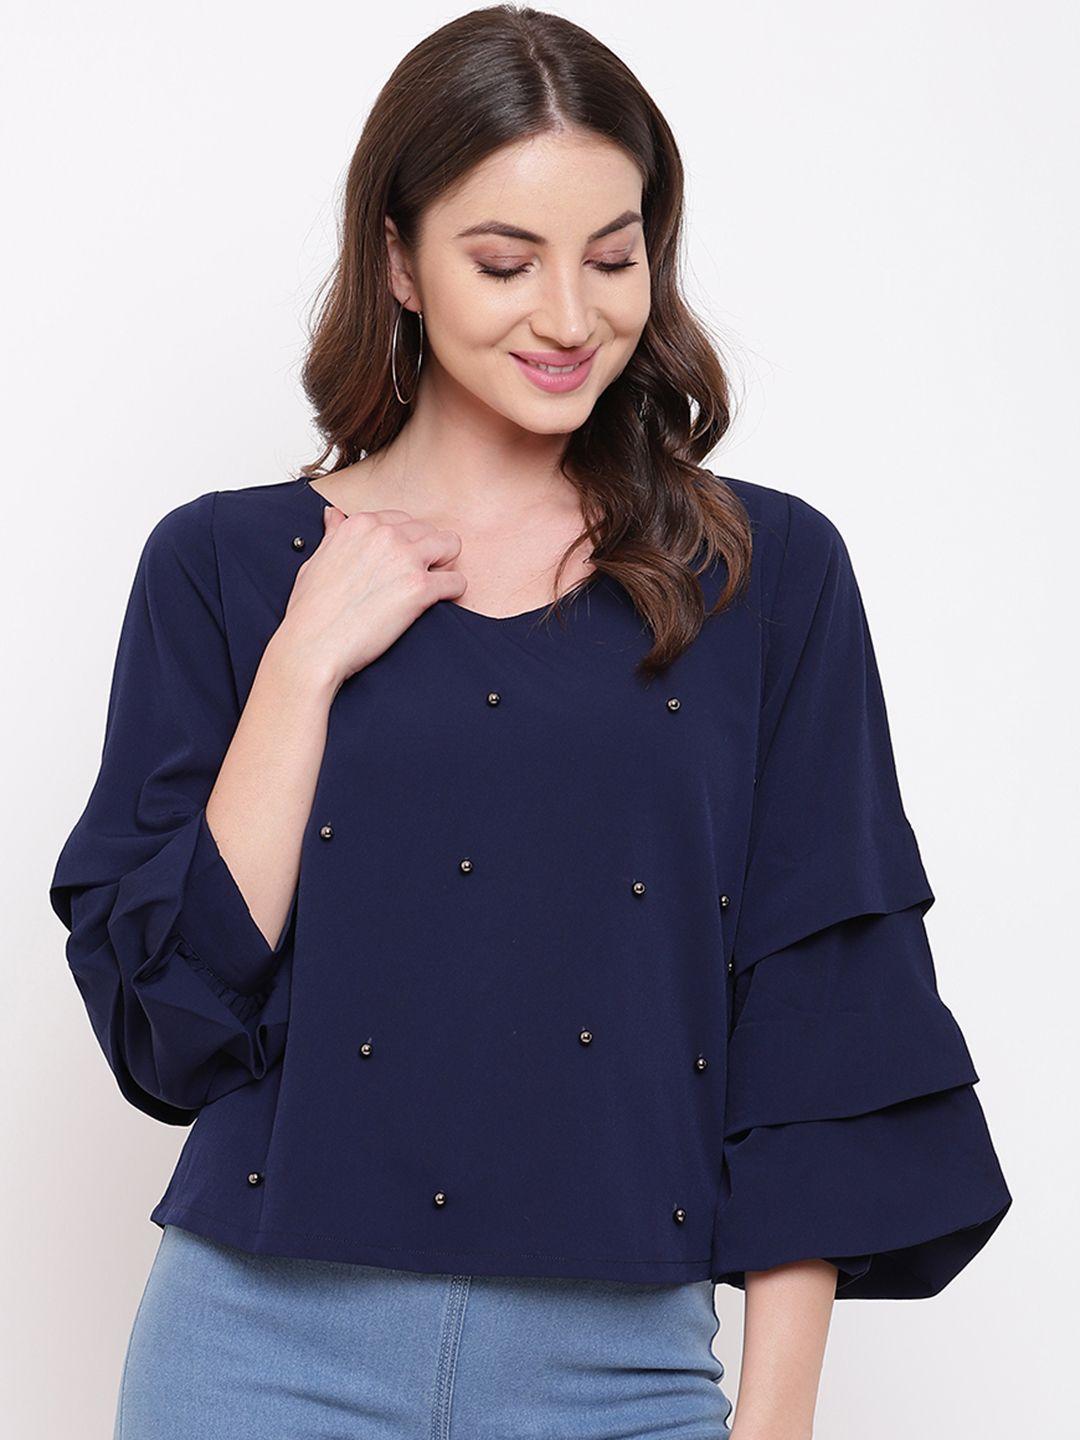 mayra women navy blue embellished a-line top